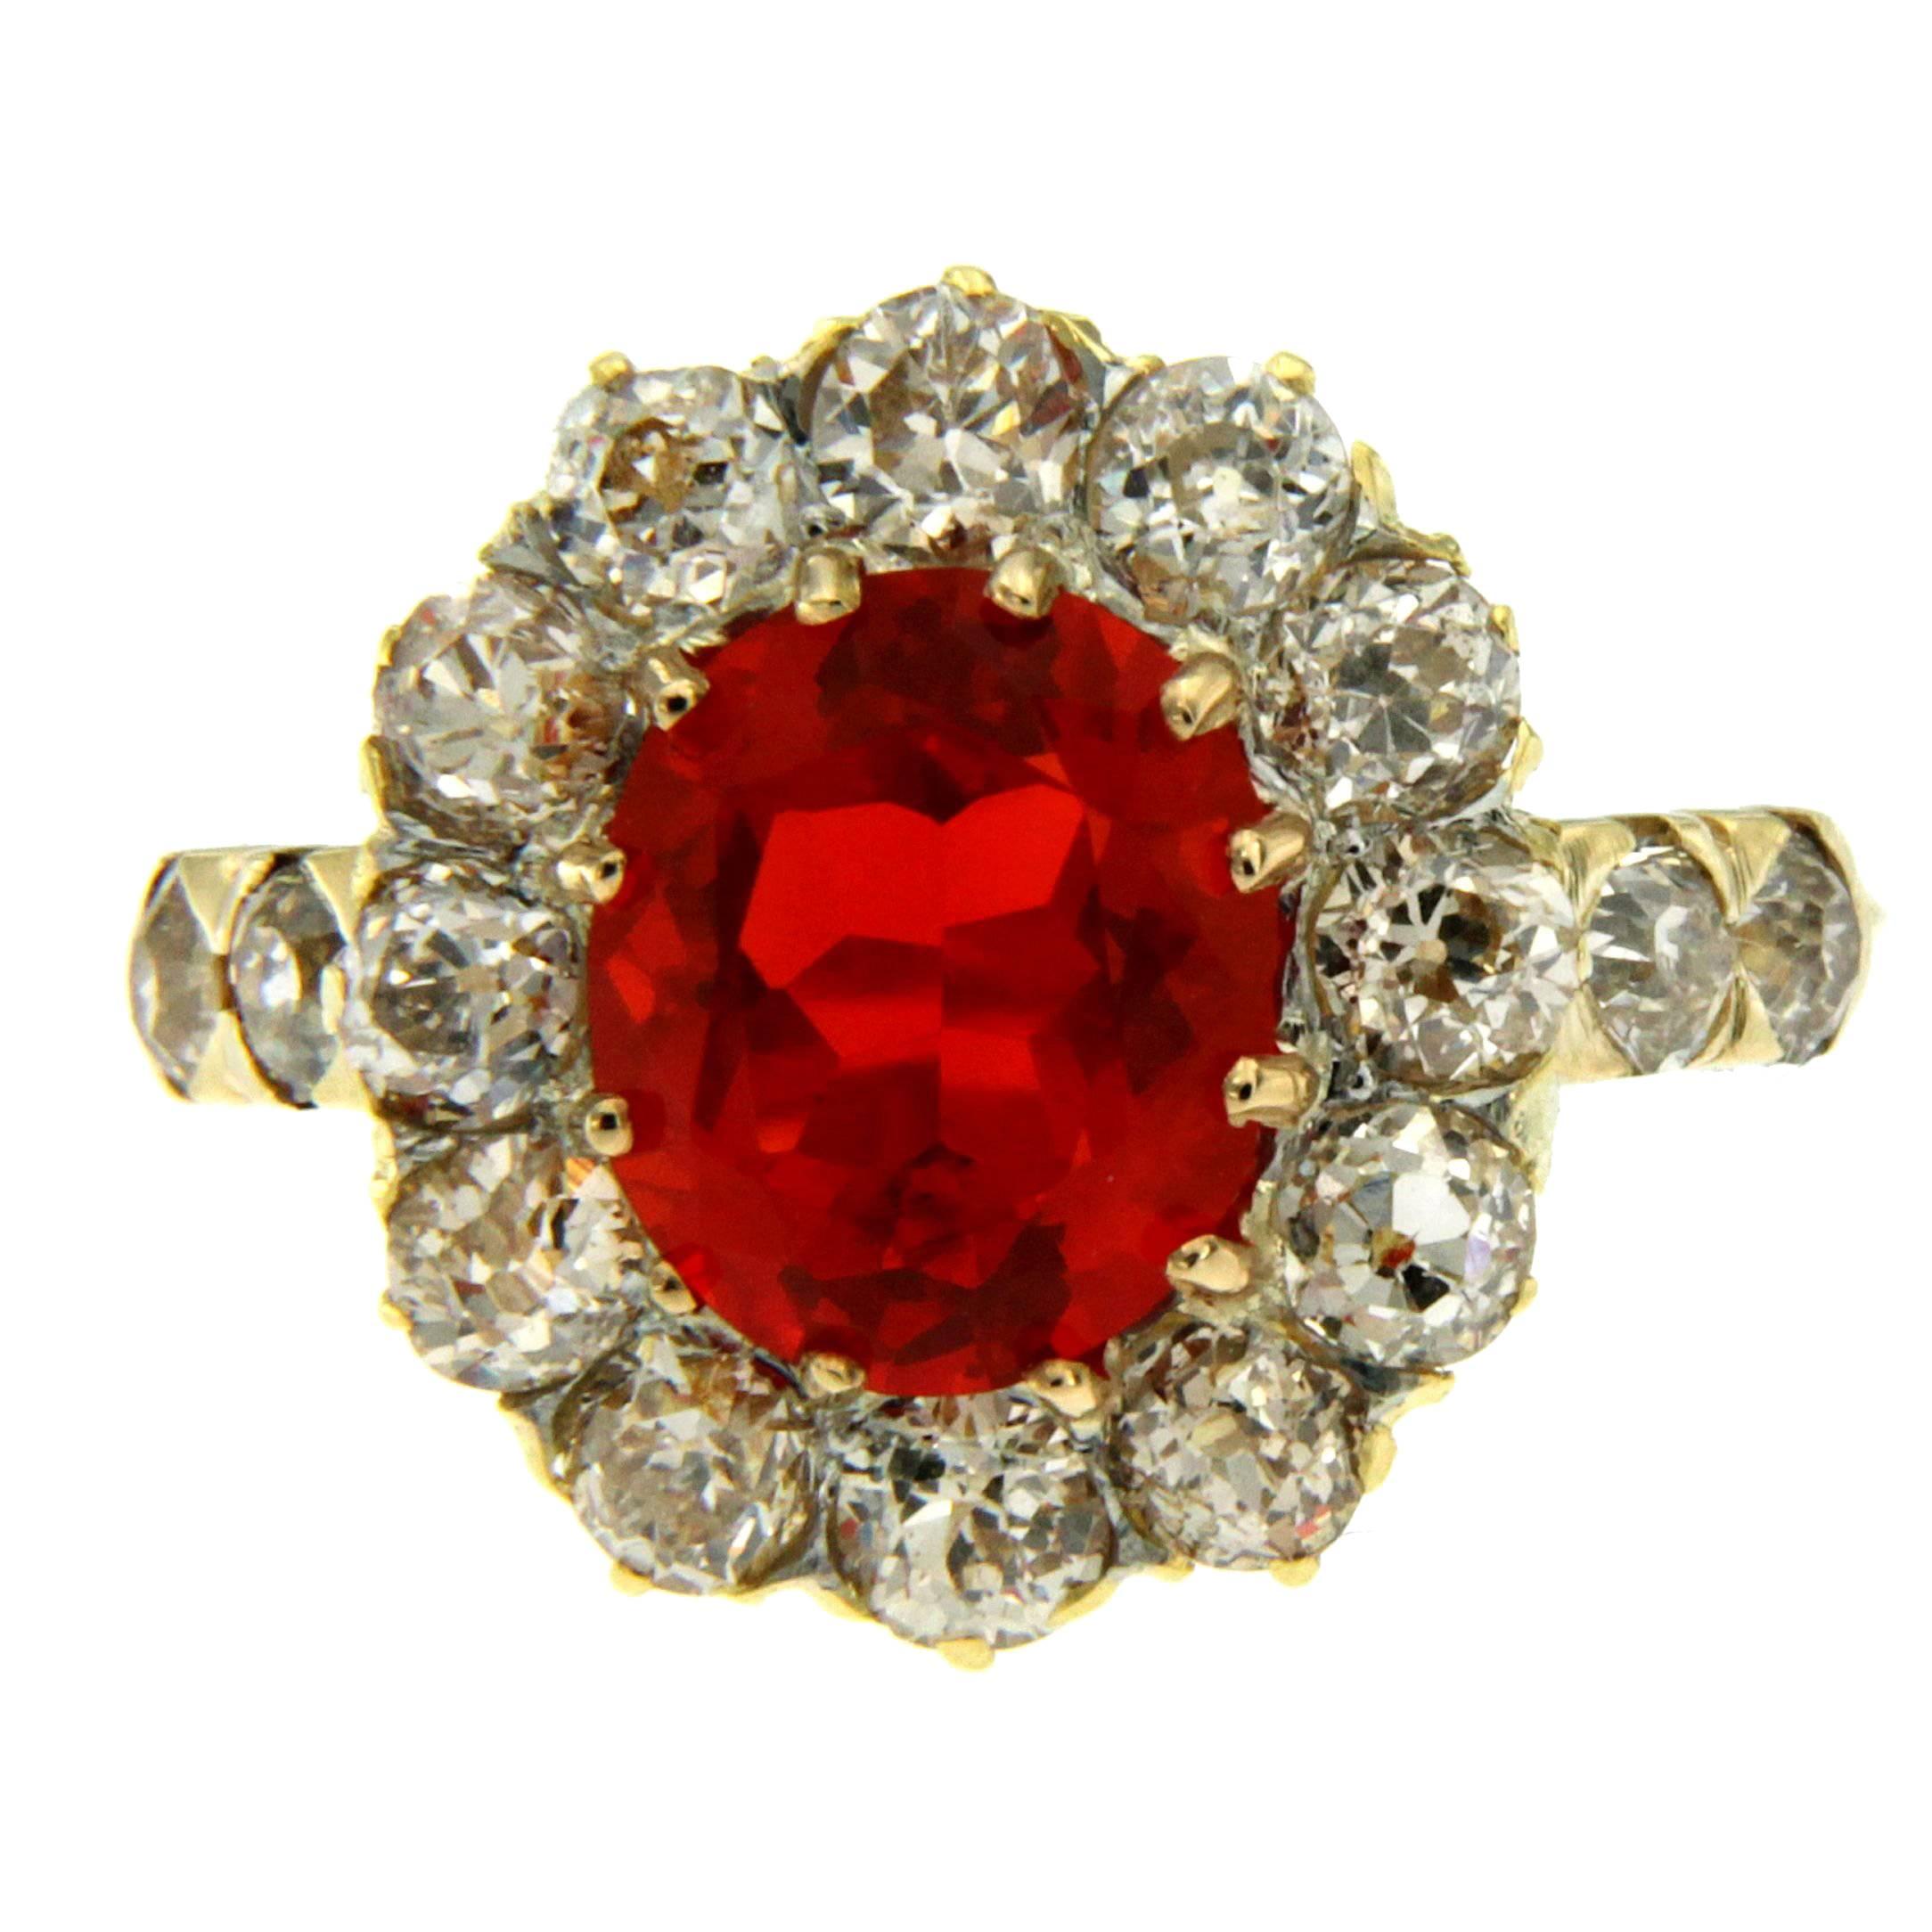 Antique Fire Opal Diamond Cluster Gold Ring